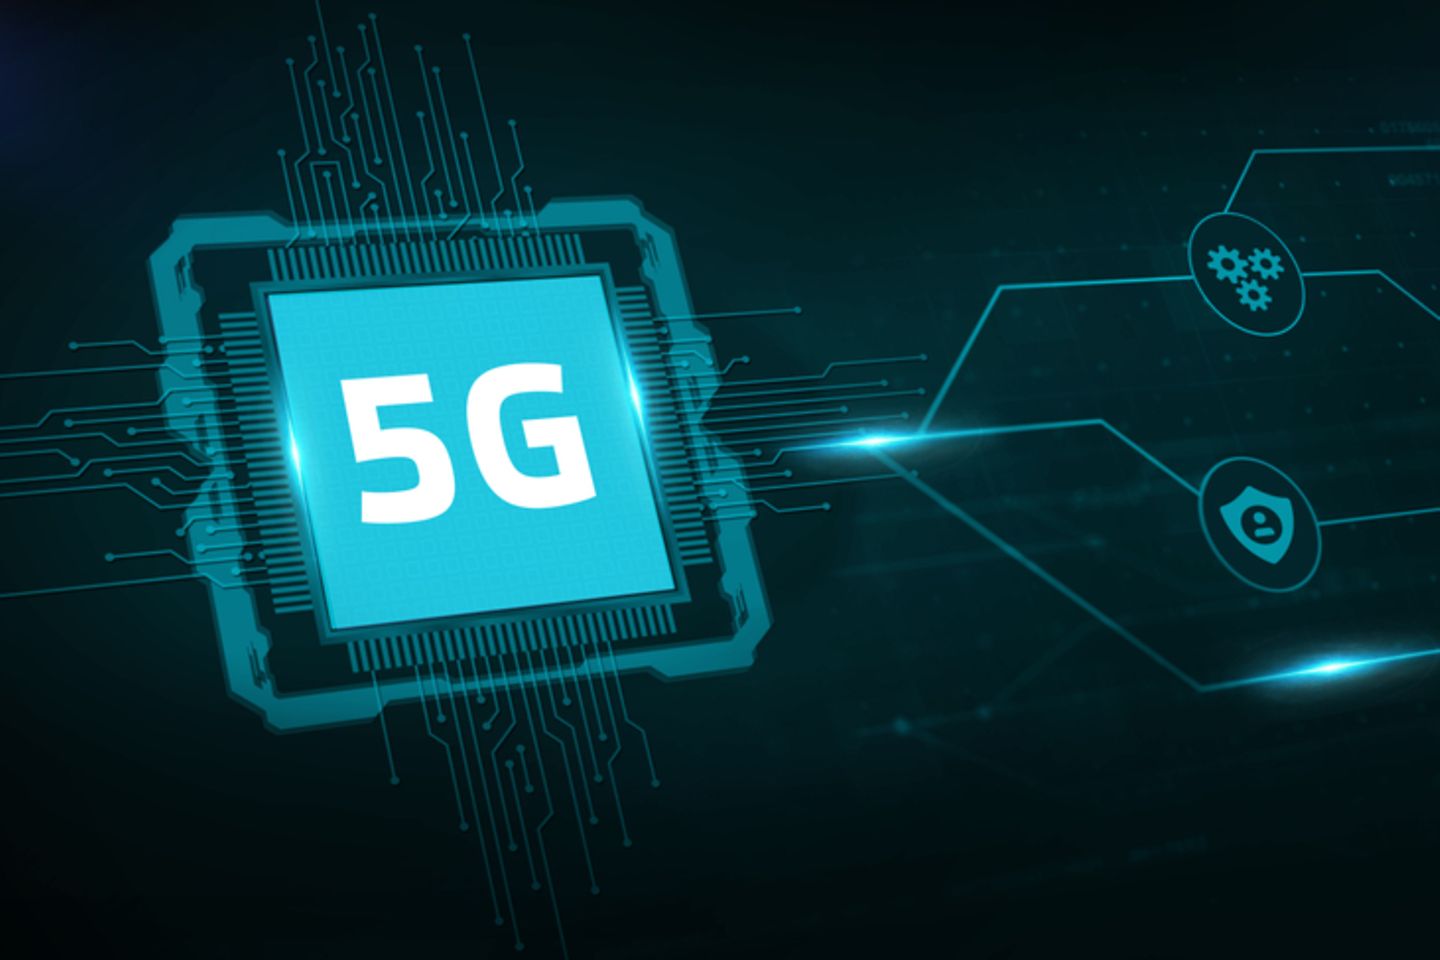 The concept of 5G network